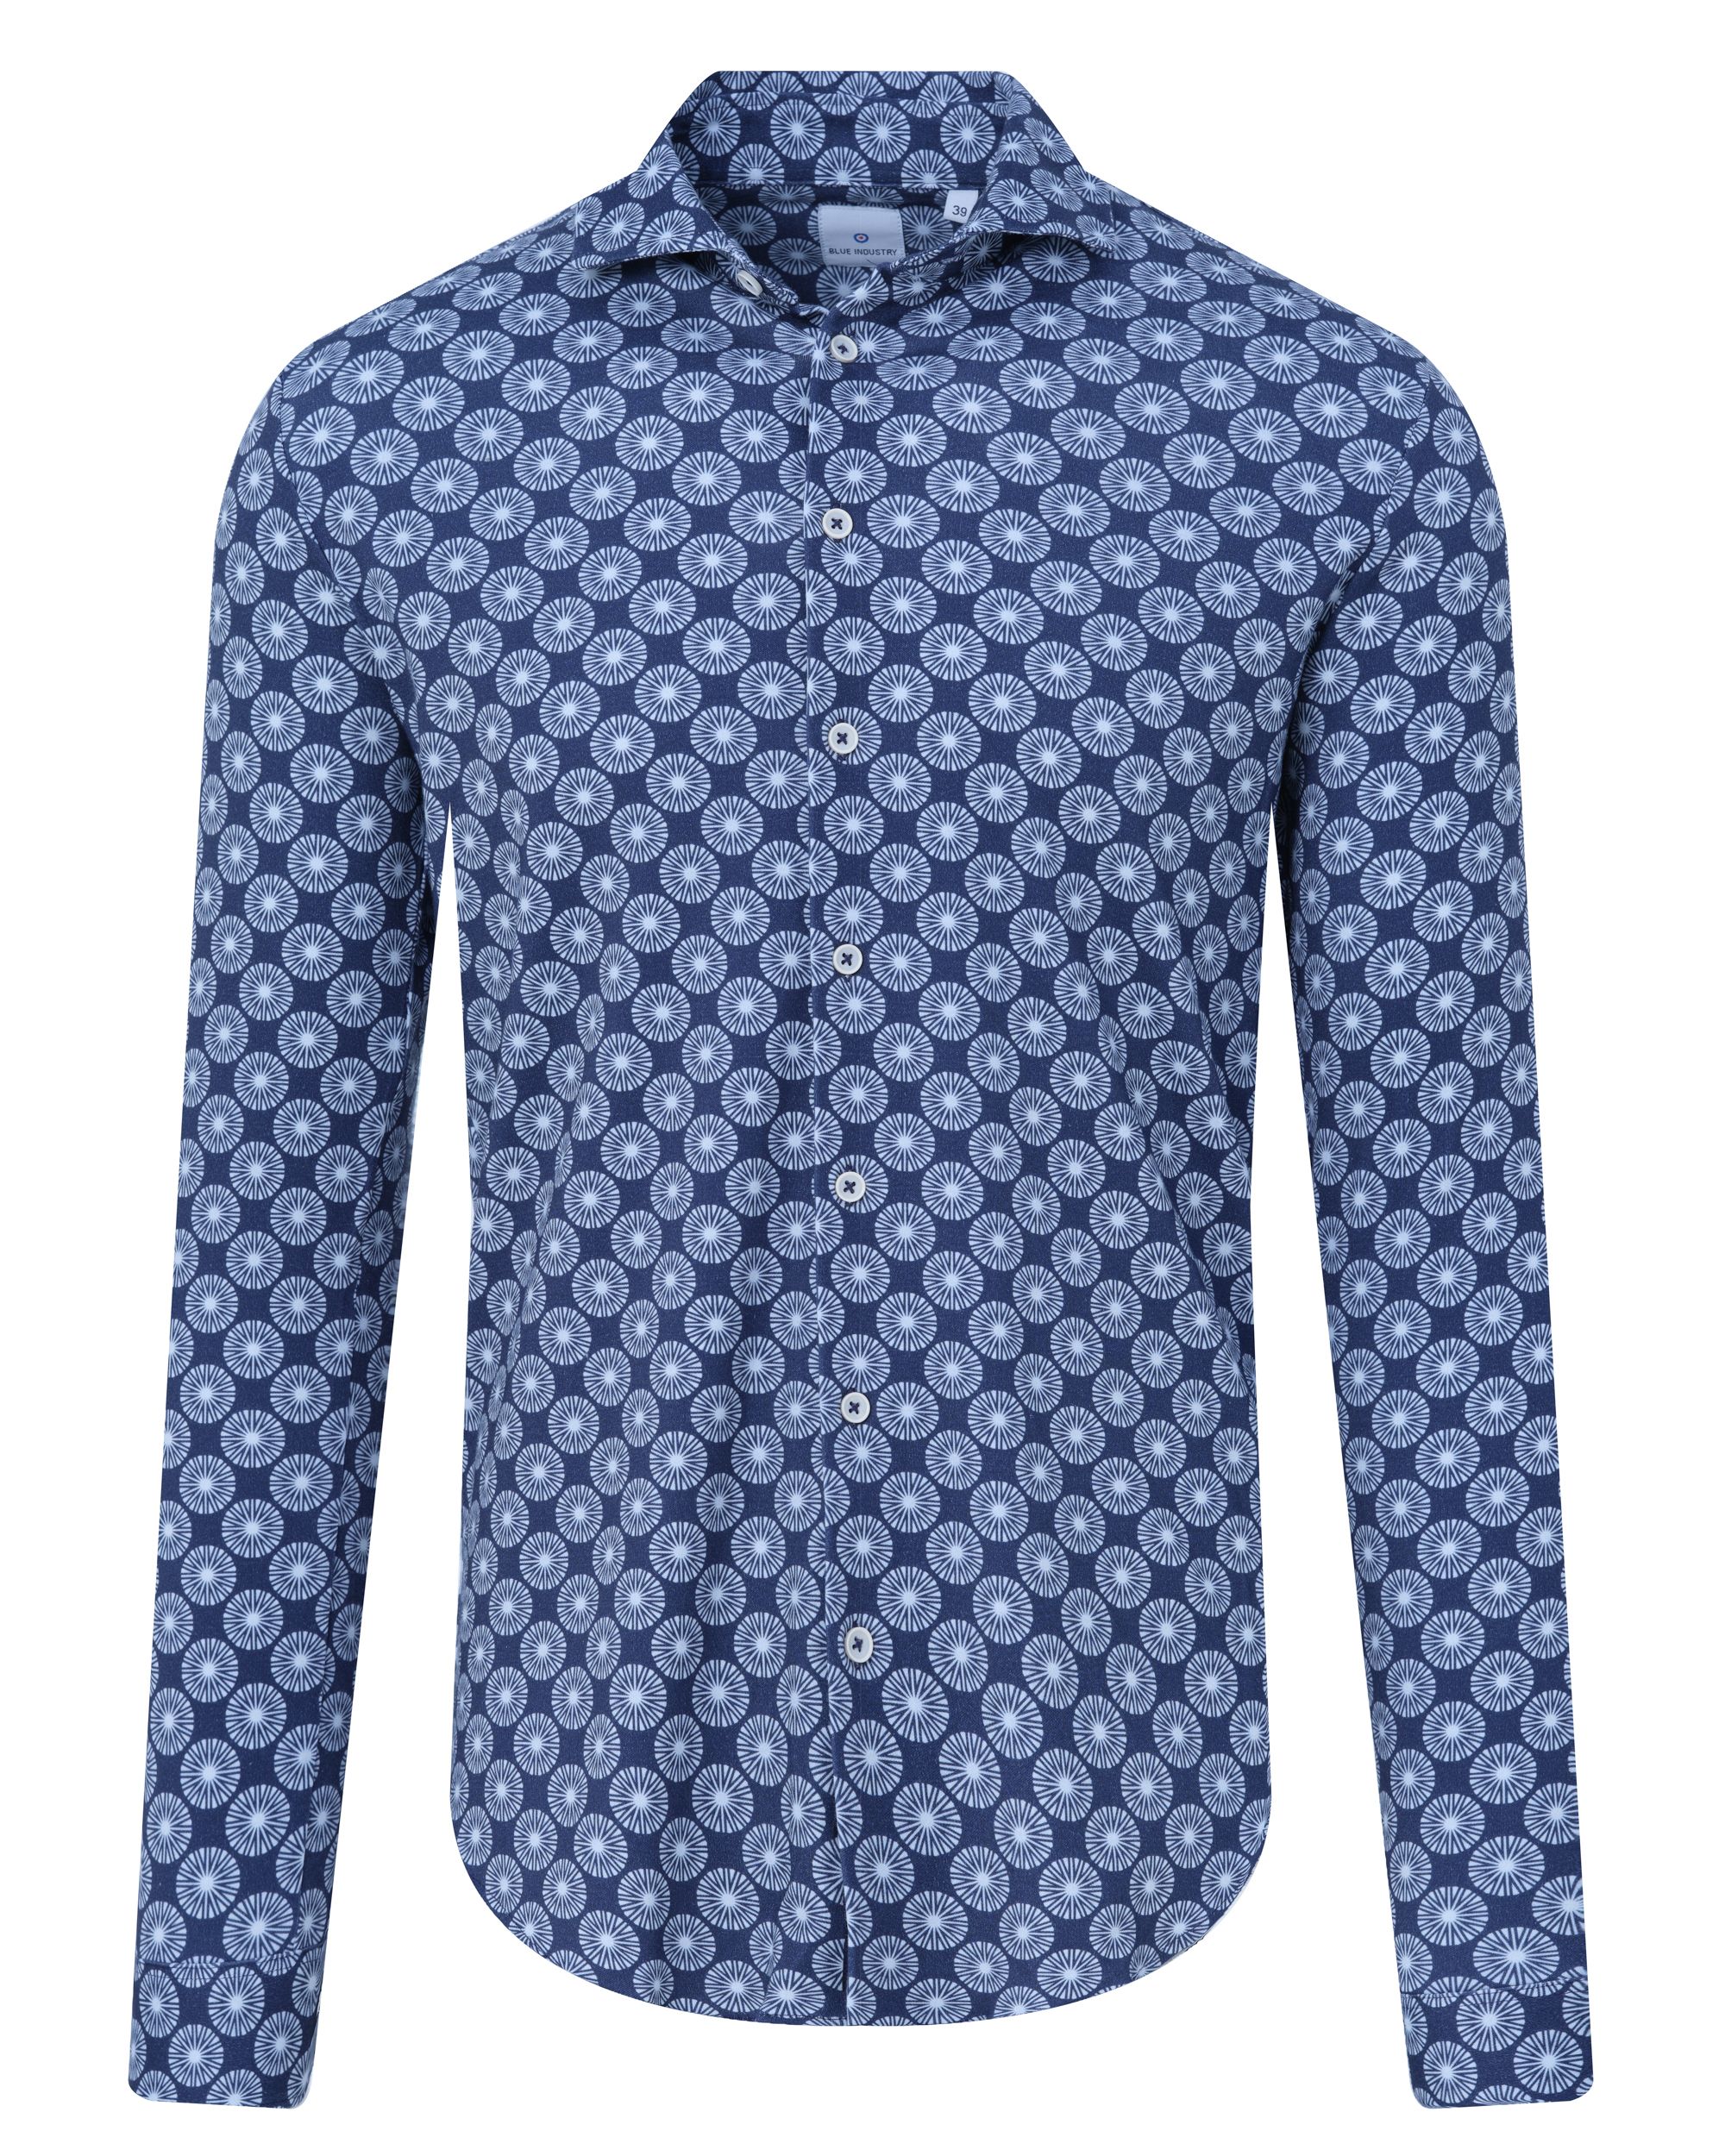 Blue Industry Casual Overhemd LM Blauw 085235-001-37